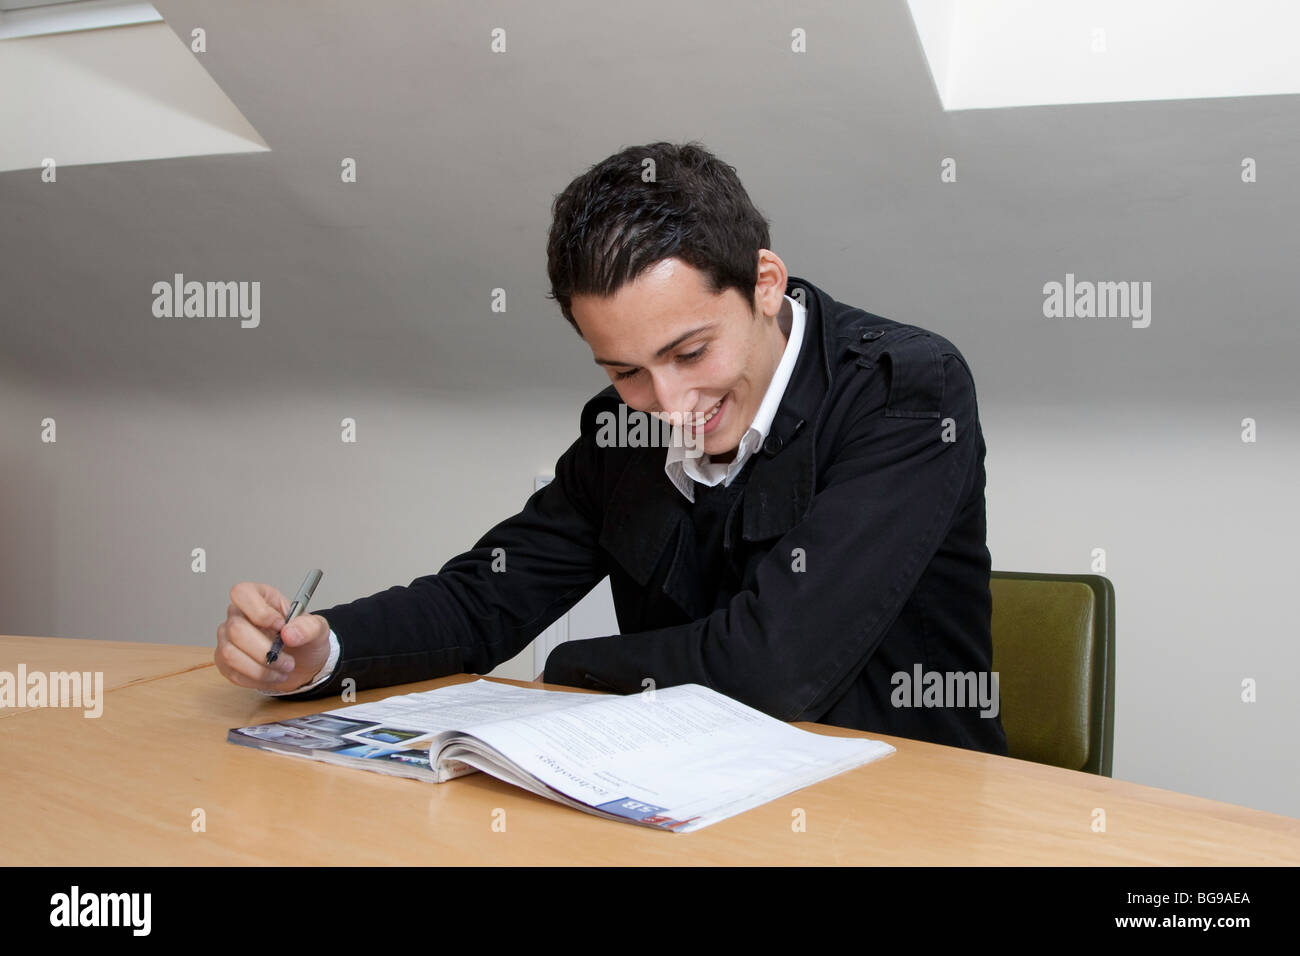 Students at English Language School in London Stock Photo